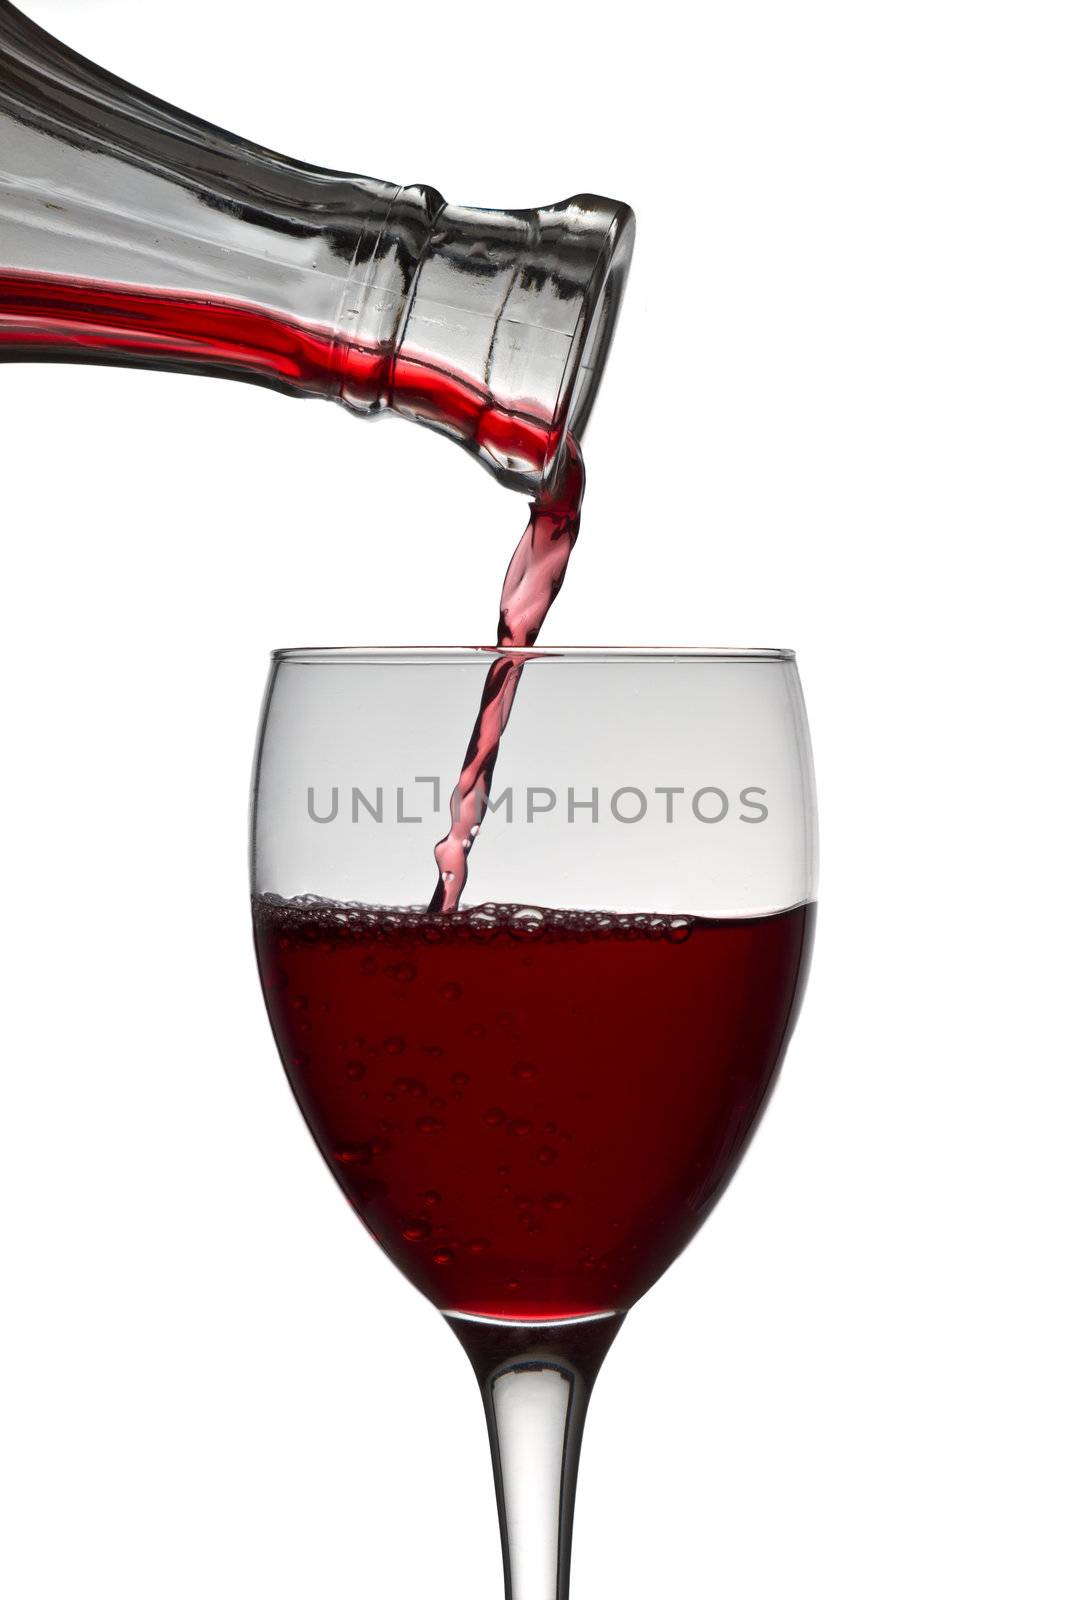 red wine pouring down from a wine decanter into a wine glass on white background